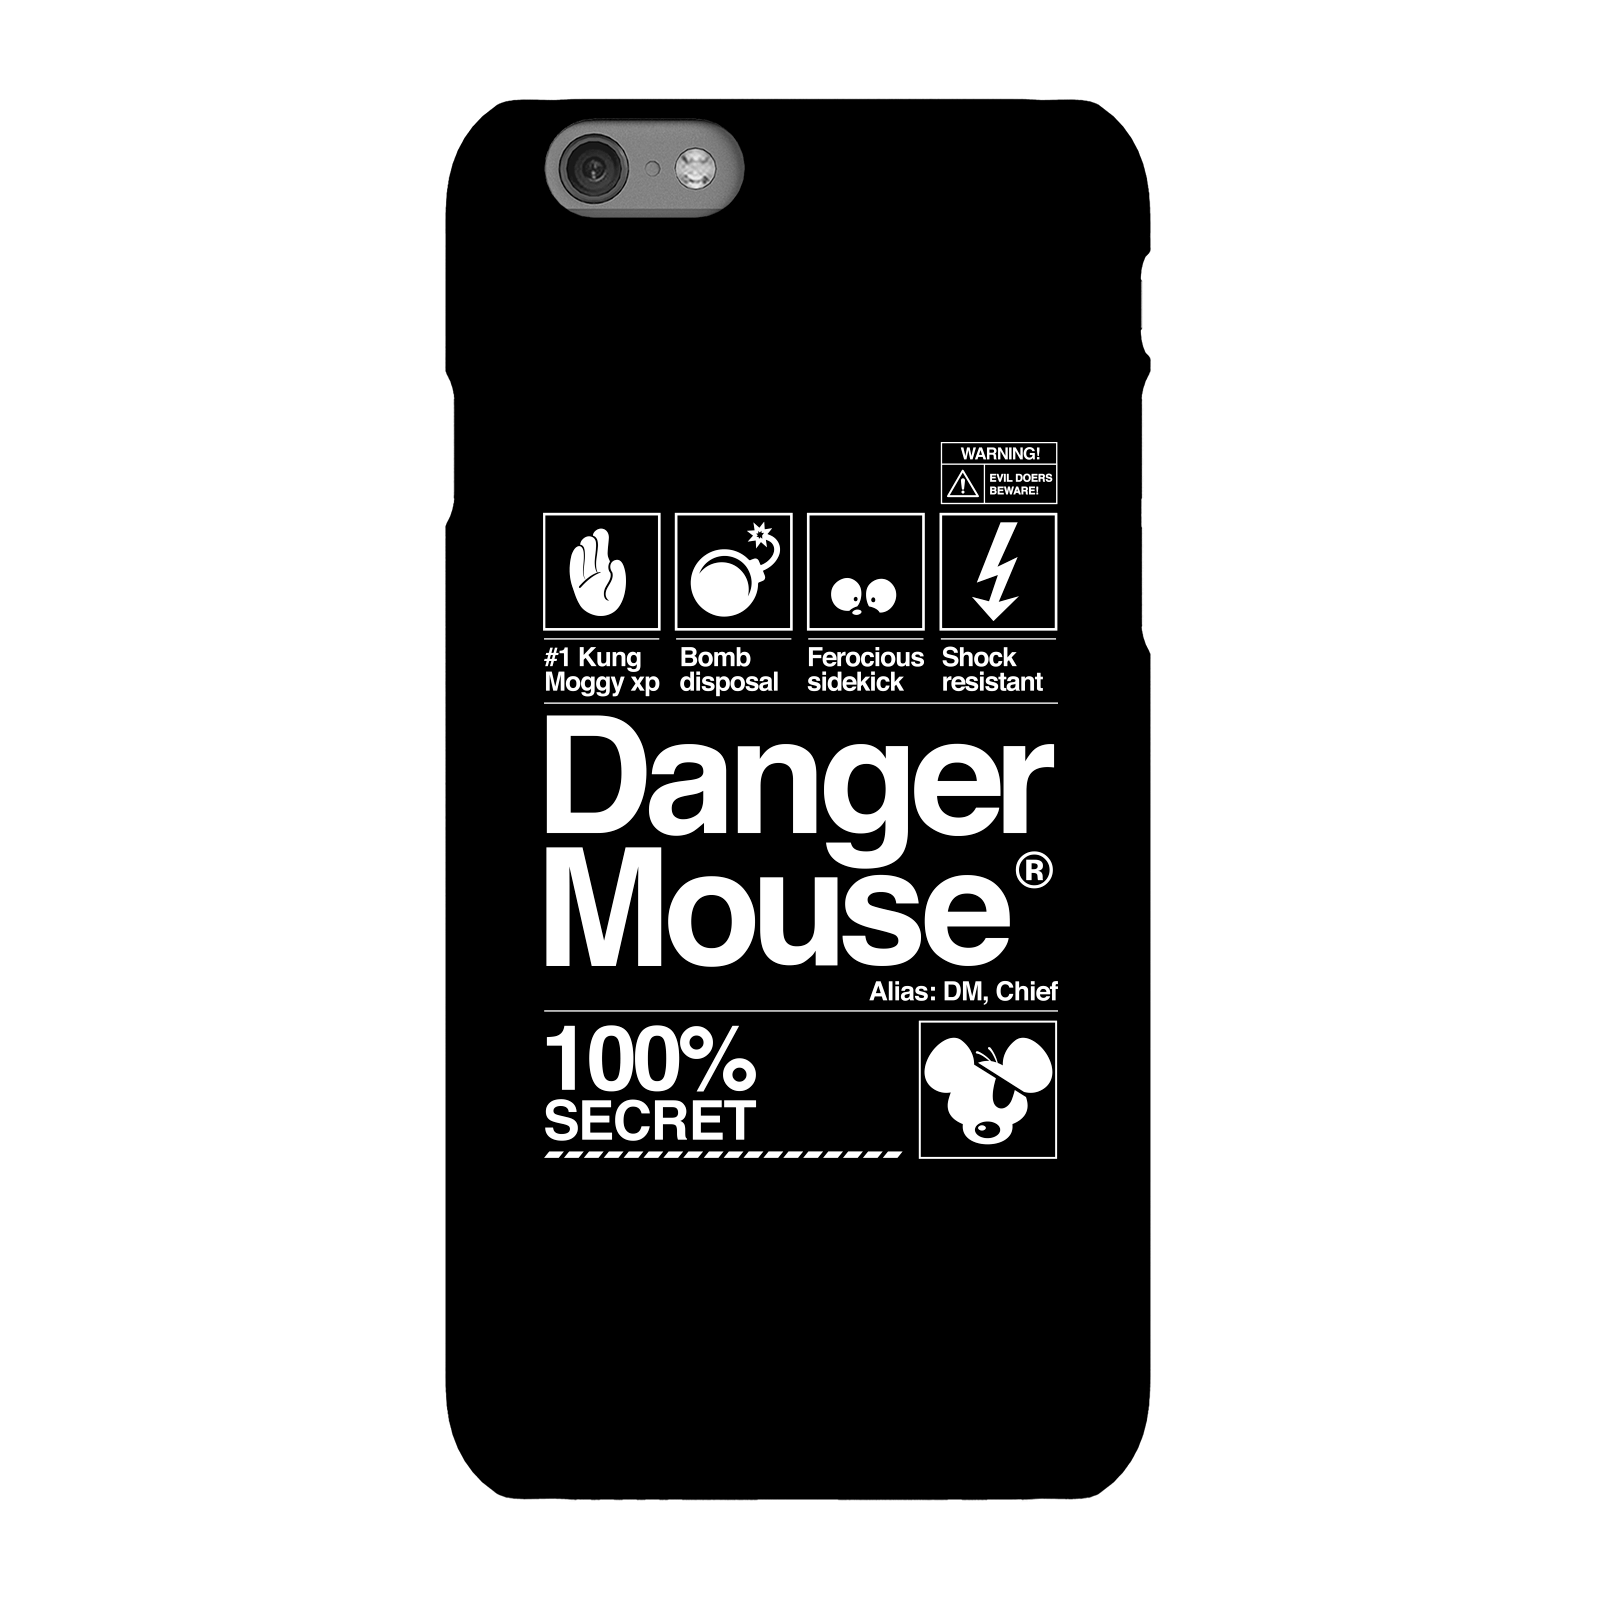 Danger Mouse 100% Secret Phone Case for iPhone and Android - iPhone 6S - Snap Case - Matte